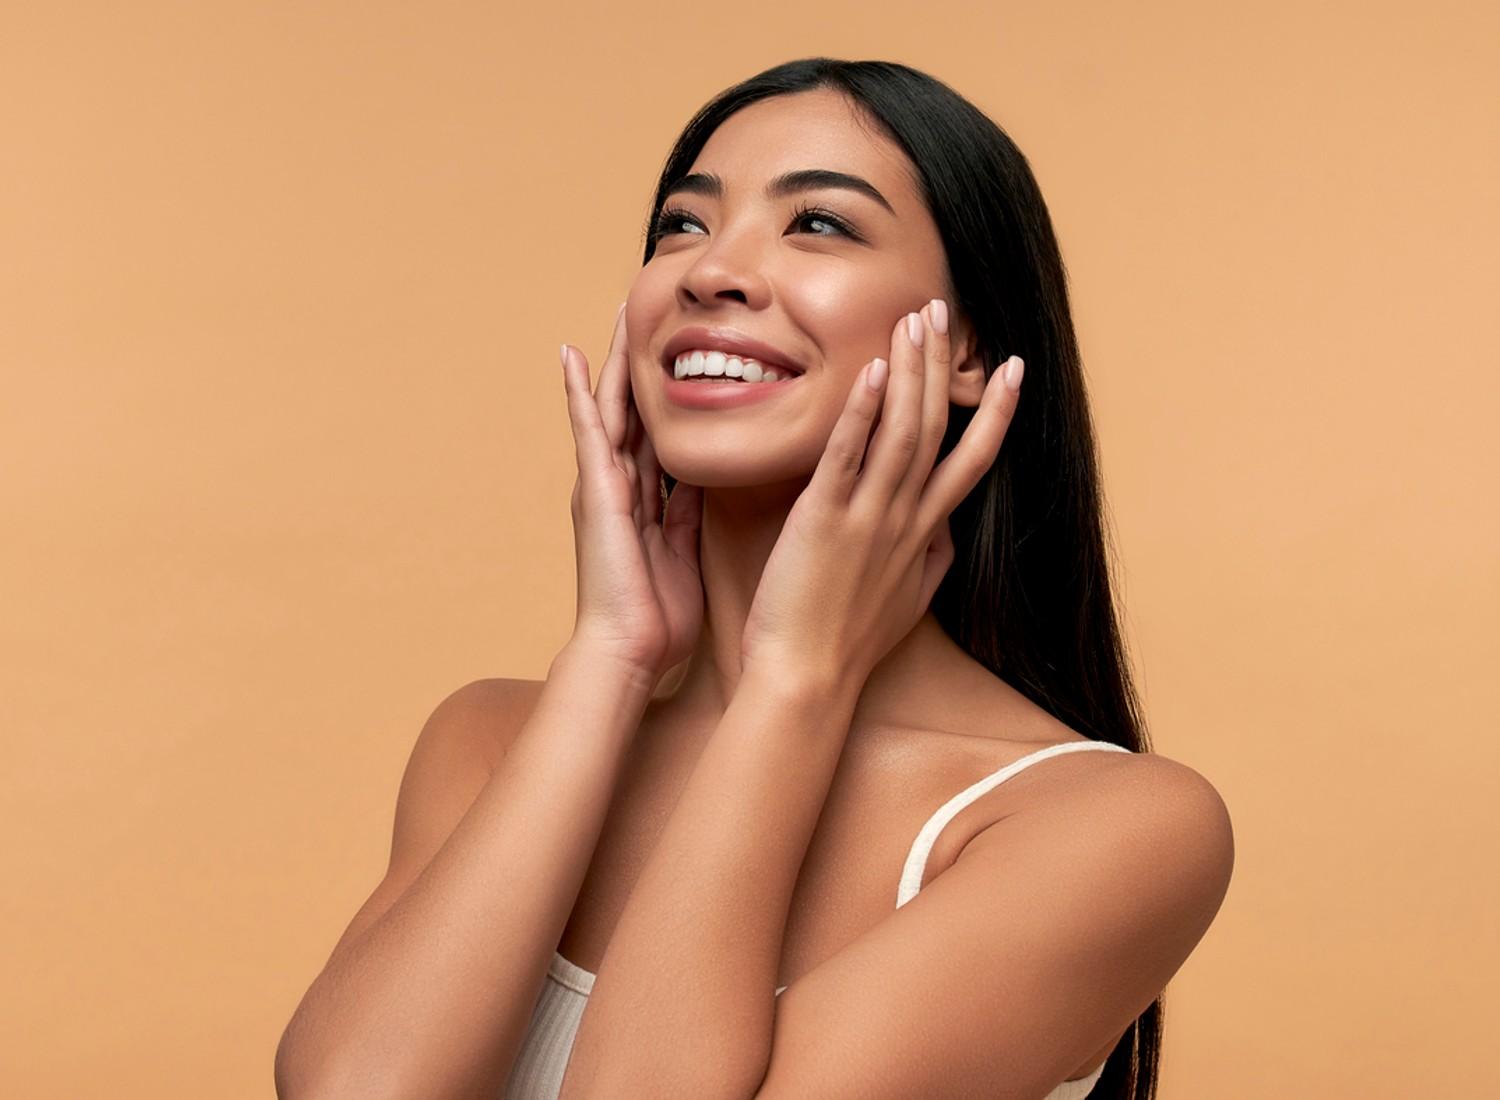 A tan woman smiling on a beige background.